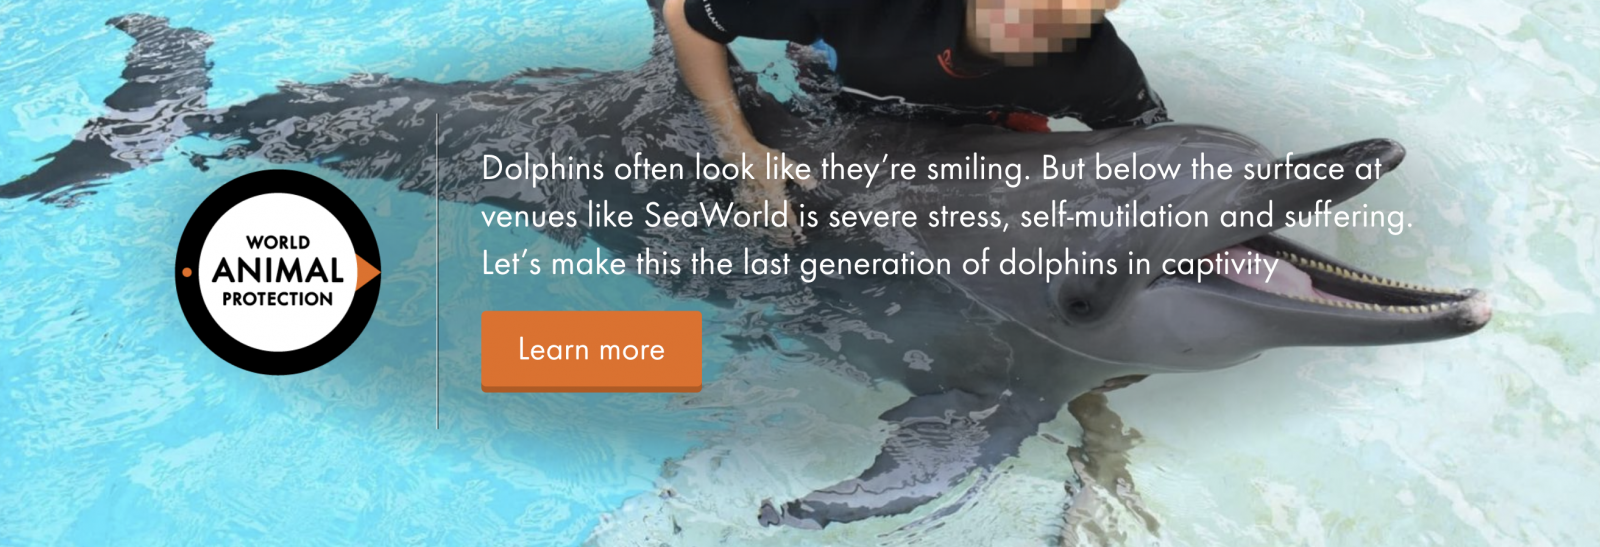 Expedia under pressure to stop selling dolphin shows